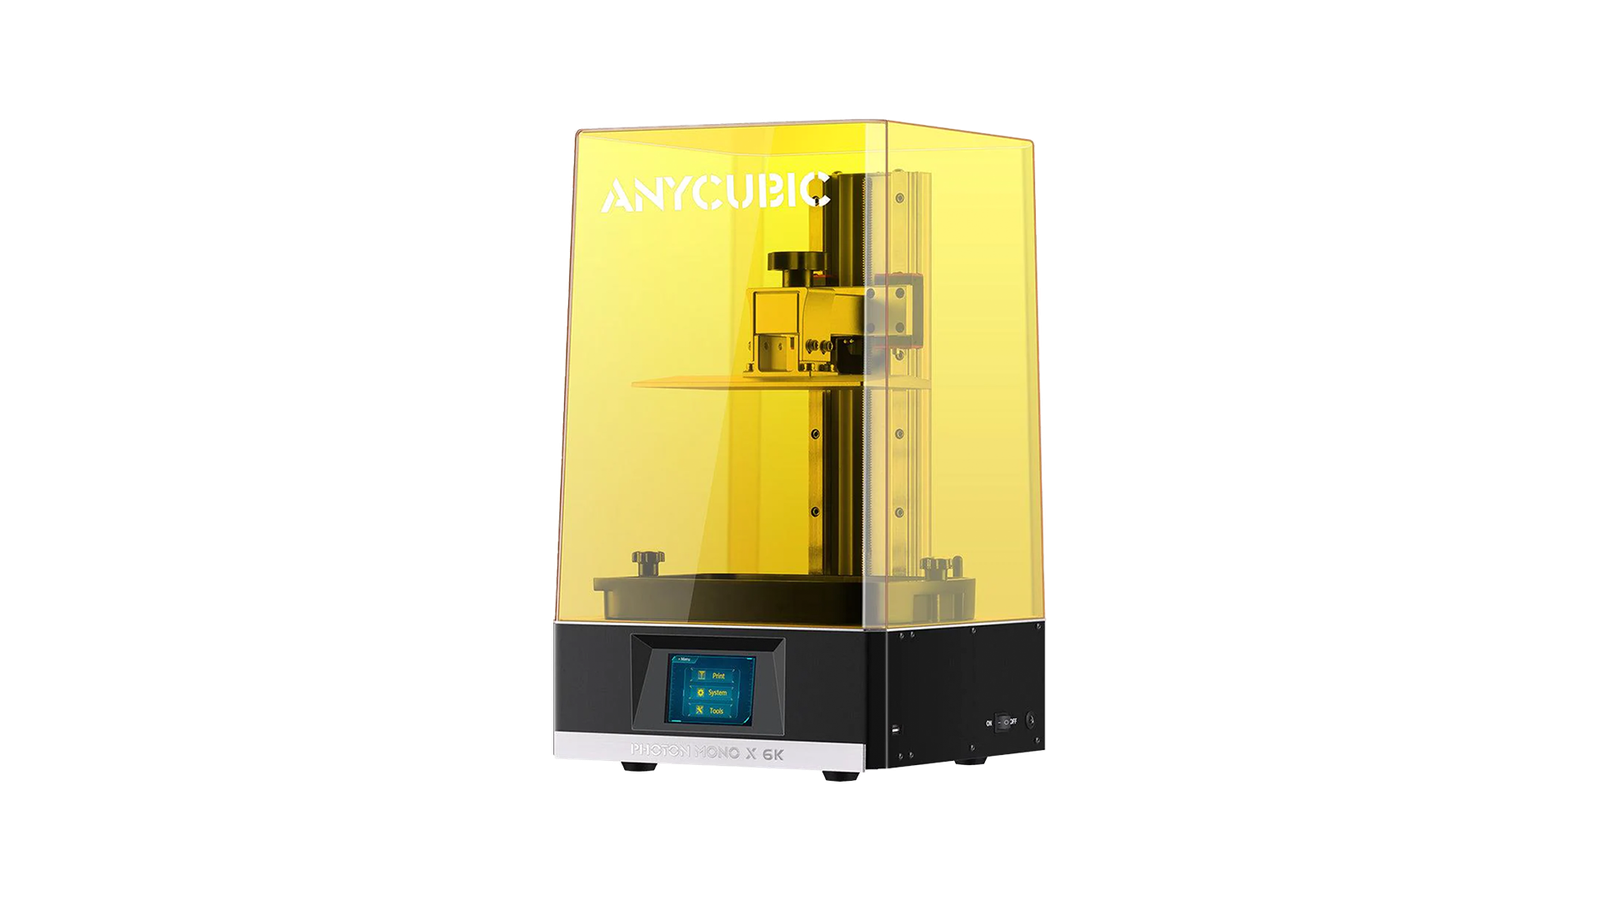 Anycubic Mono X 6K - The best budget 3D printer for larger prints